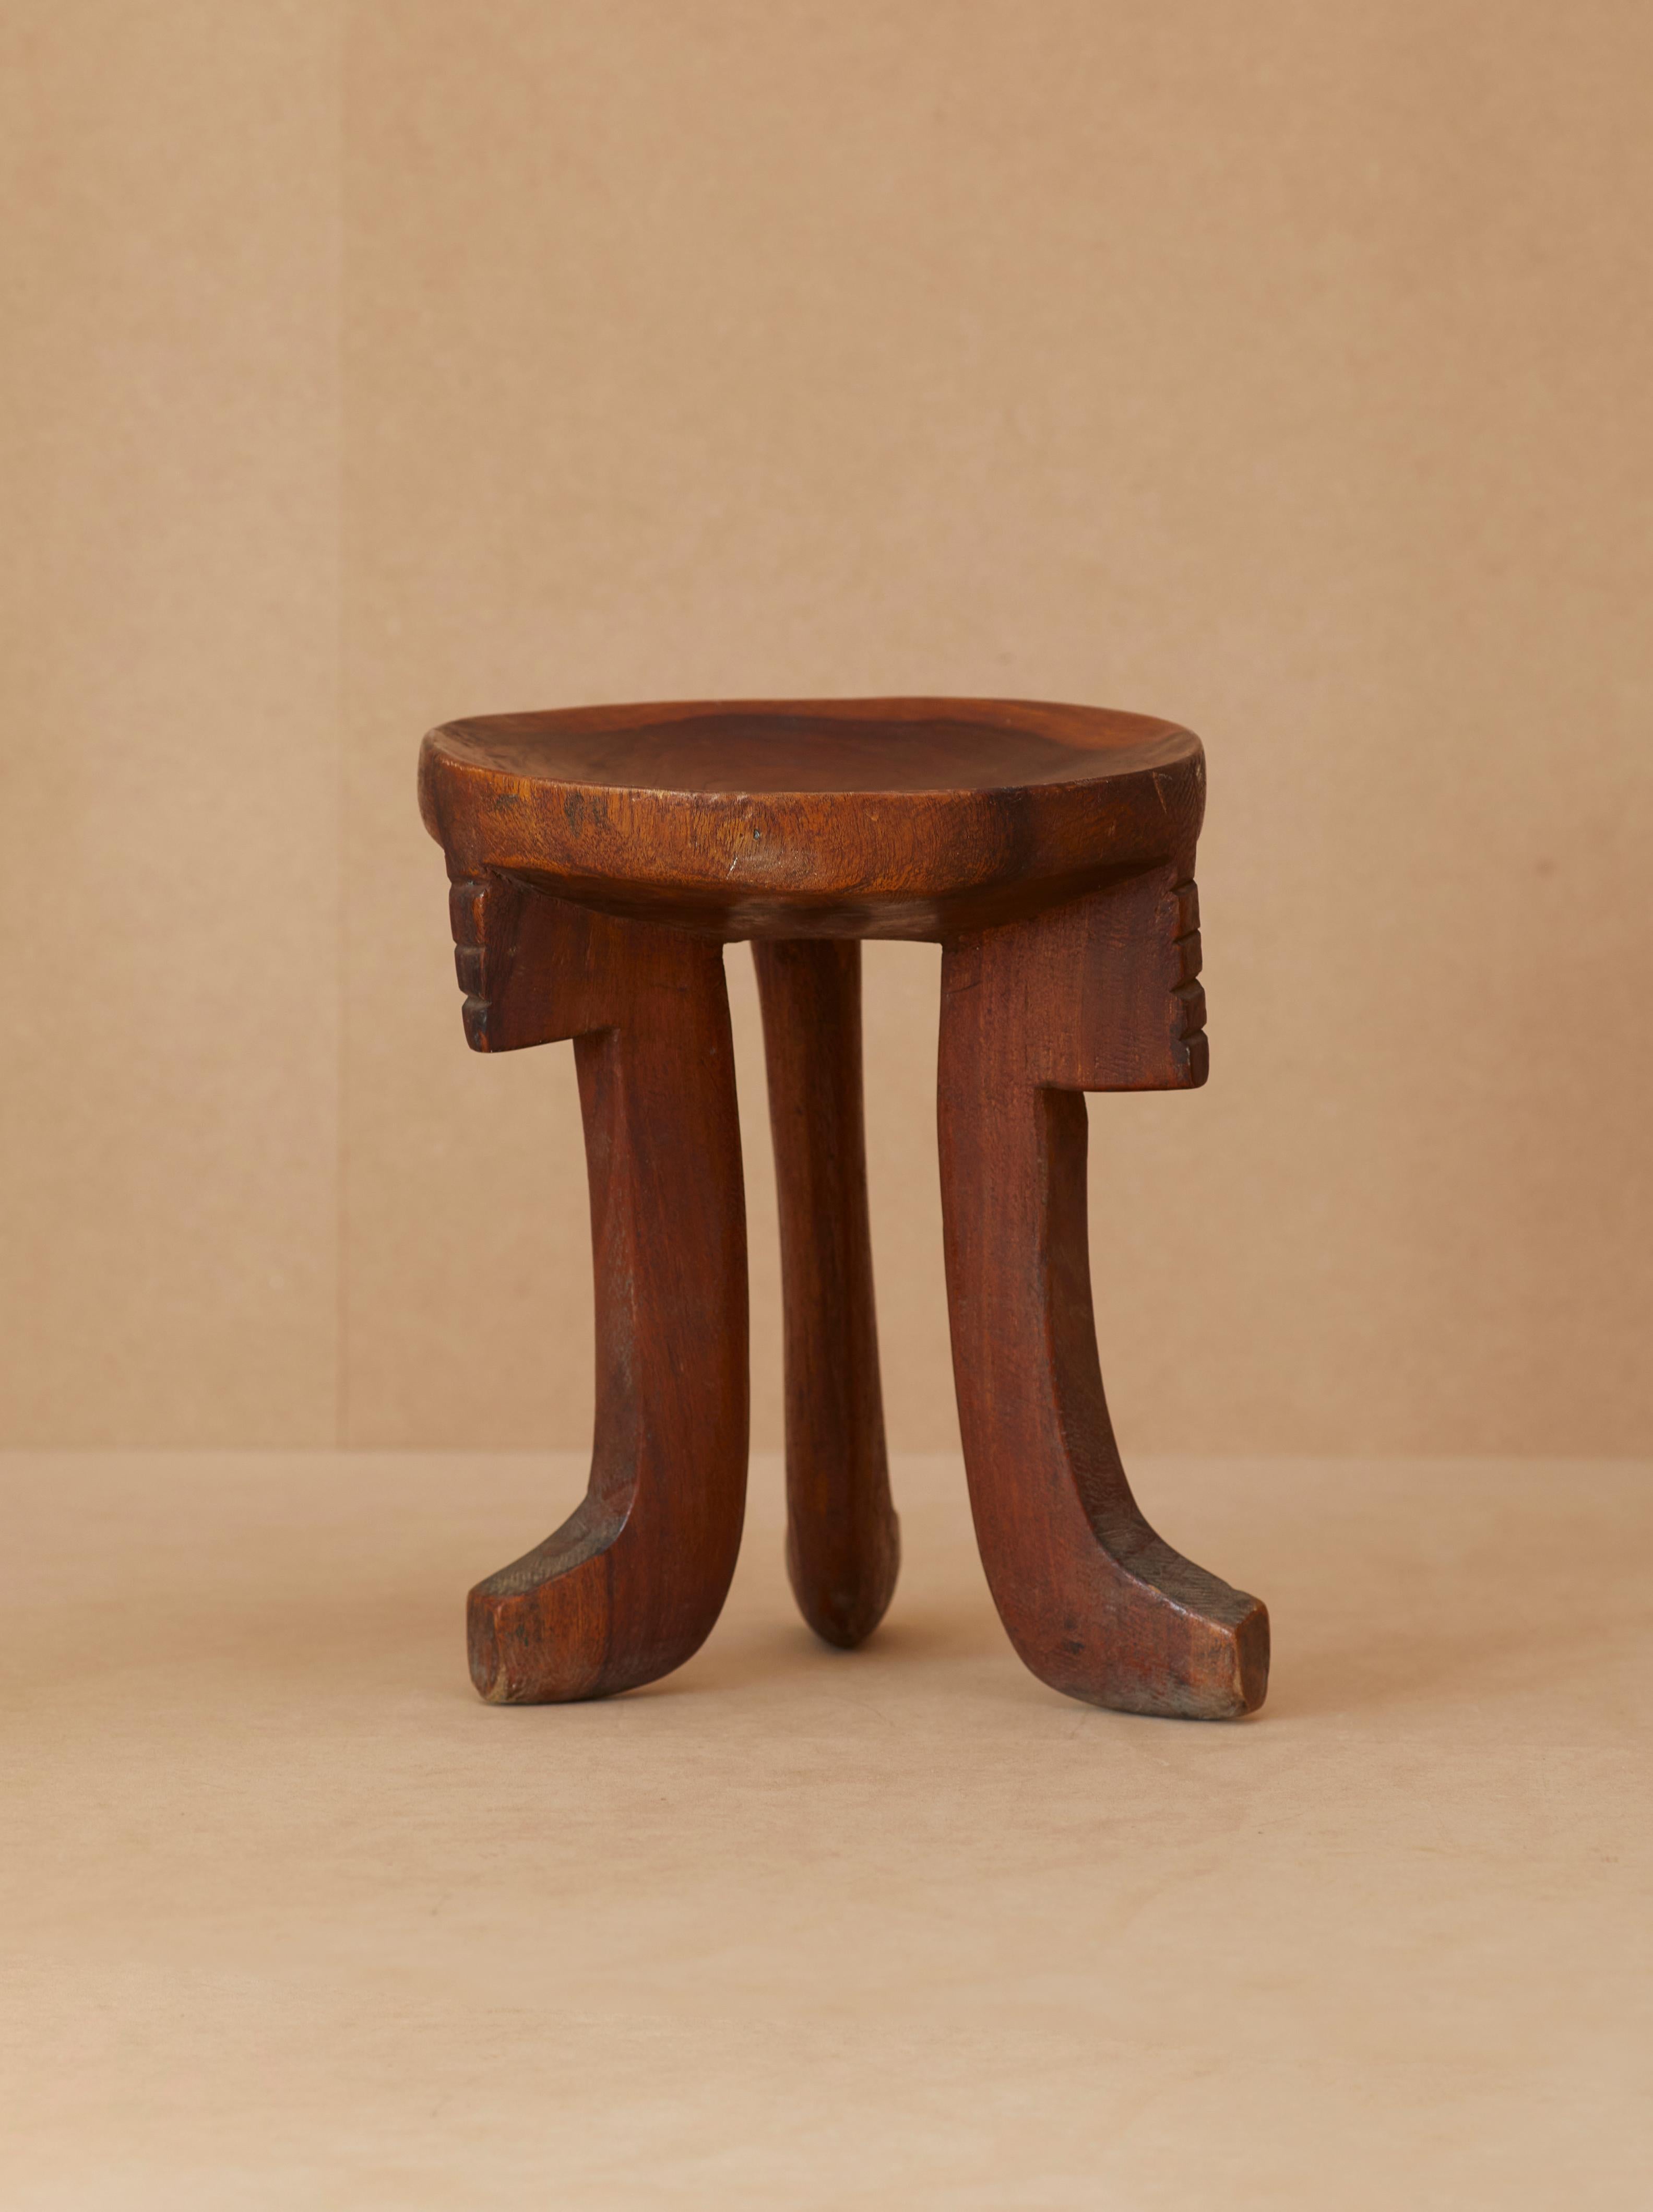 Antique Ethiopian stool from the mid-20th century, masterfully hand-carved from a single bloc of wood.

Beautiful condition and patina.